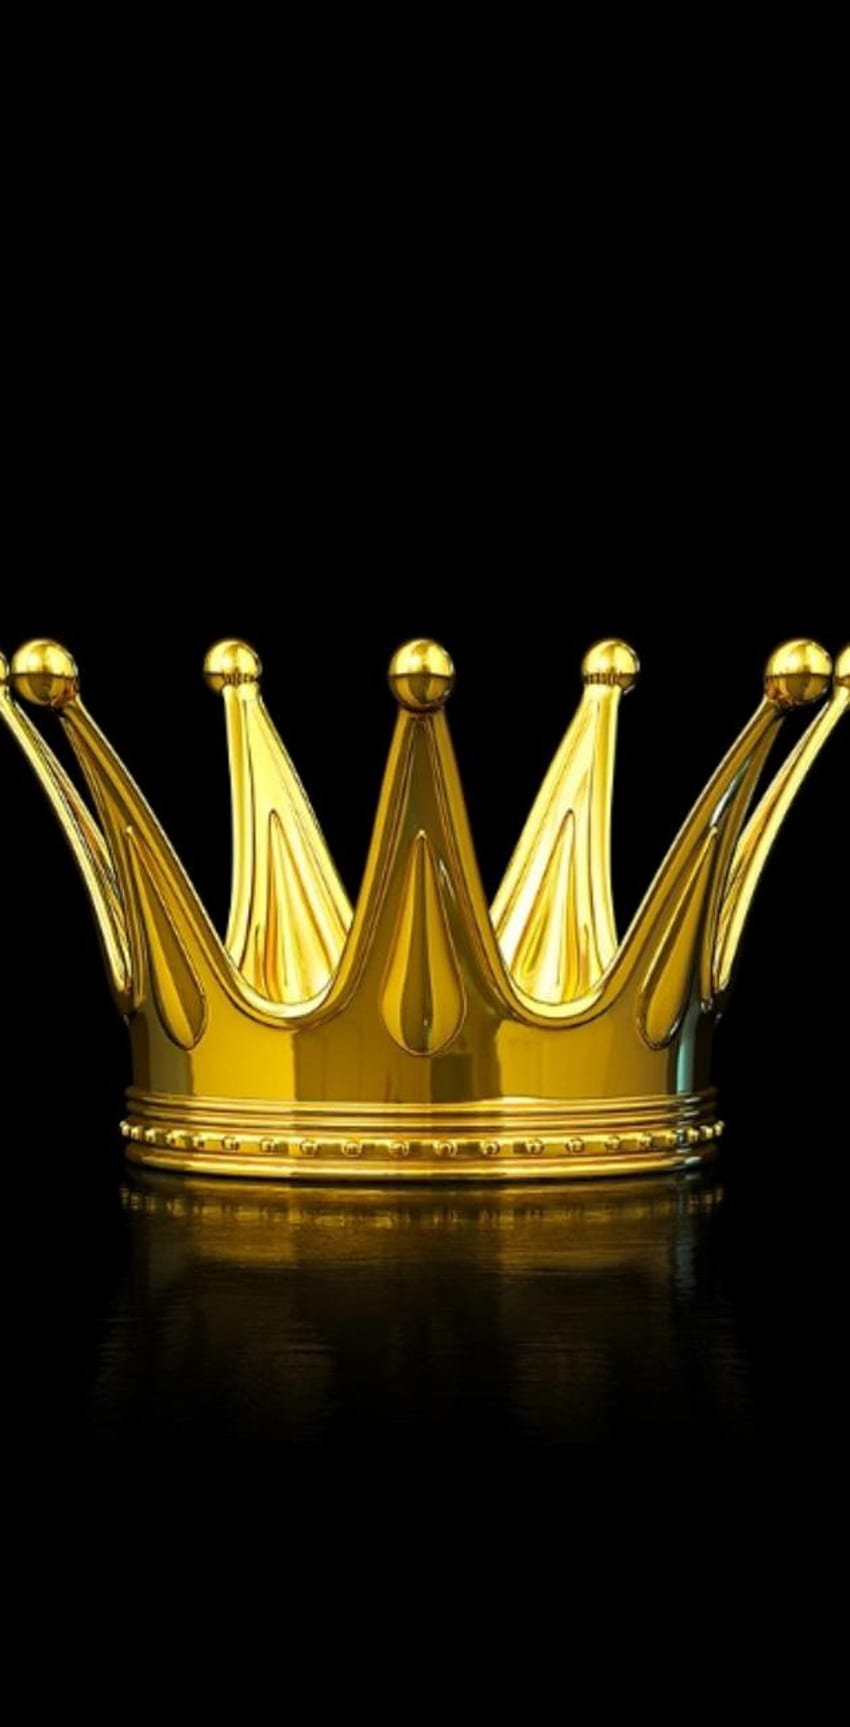 Premium Vector | King royal crown ilhouette isolated on white background.